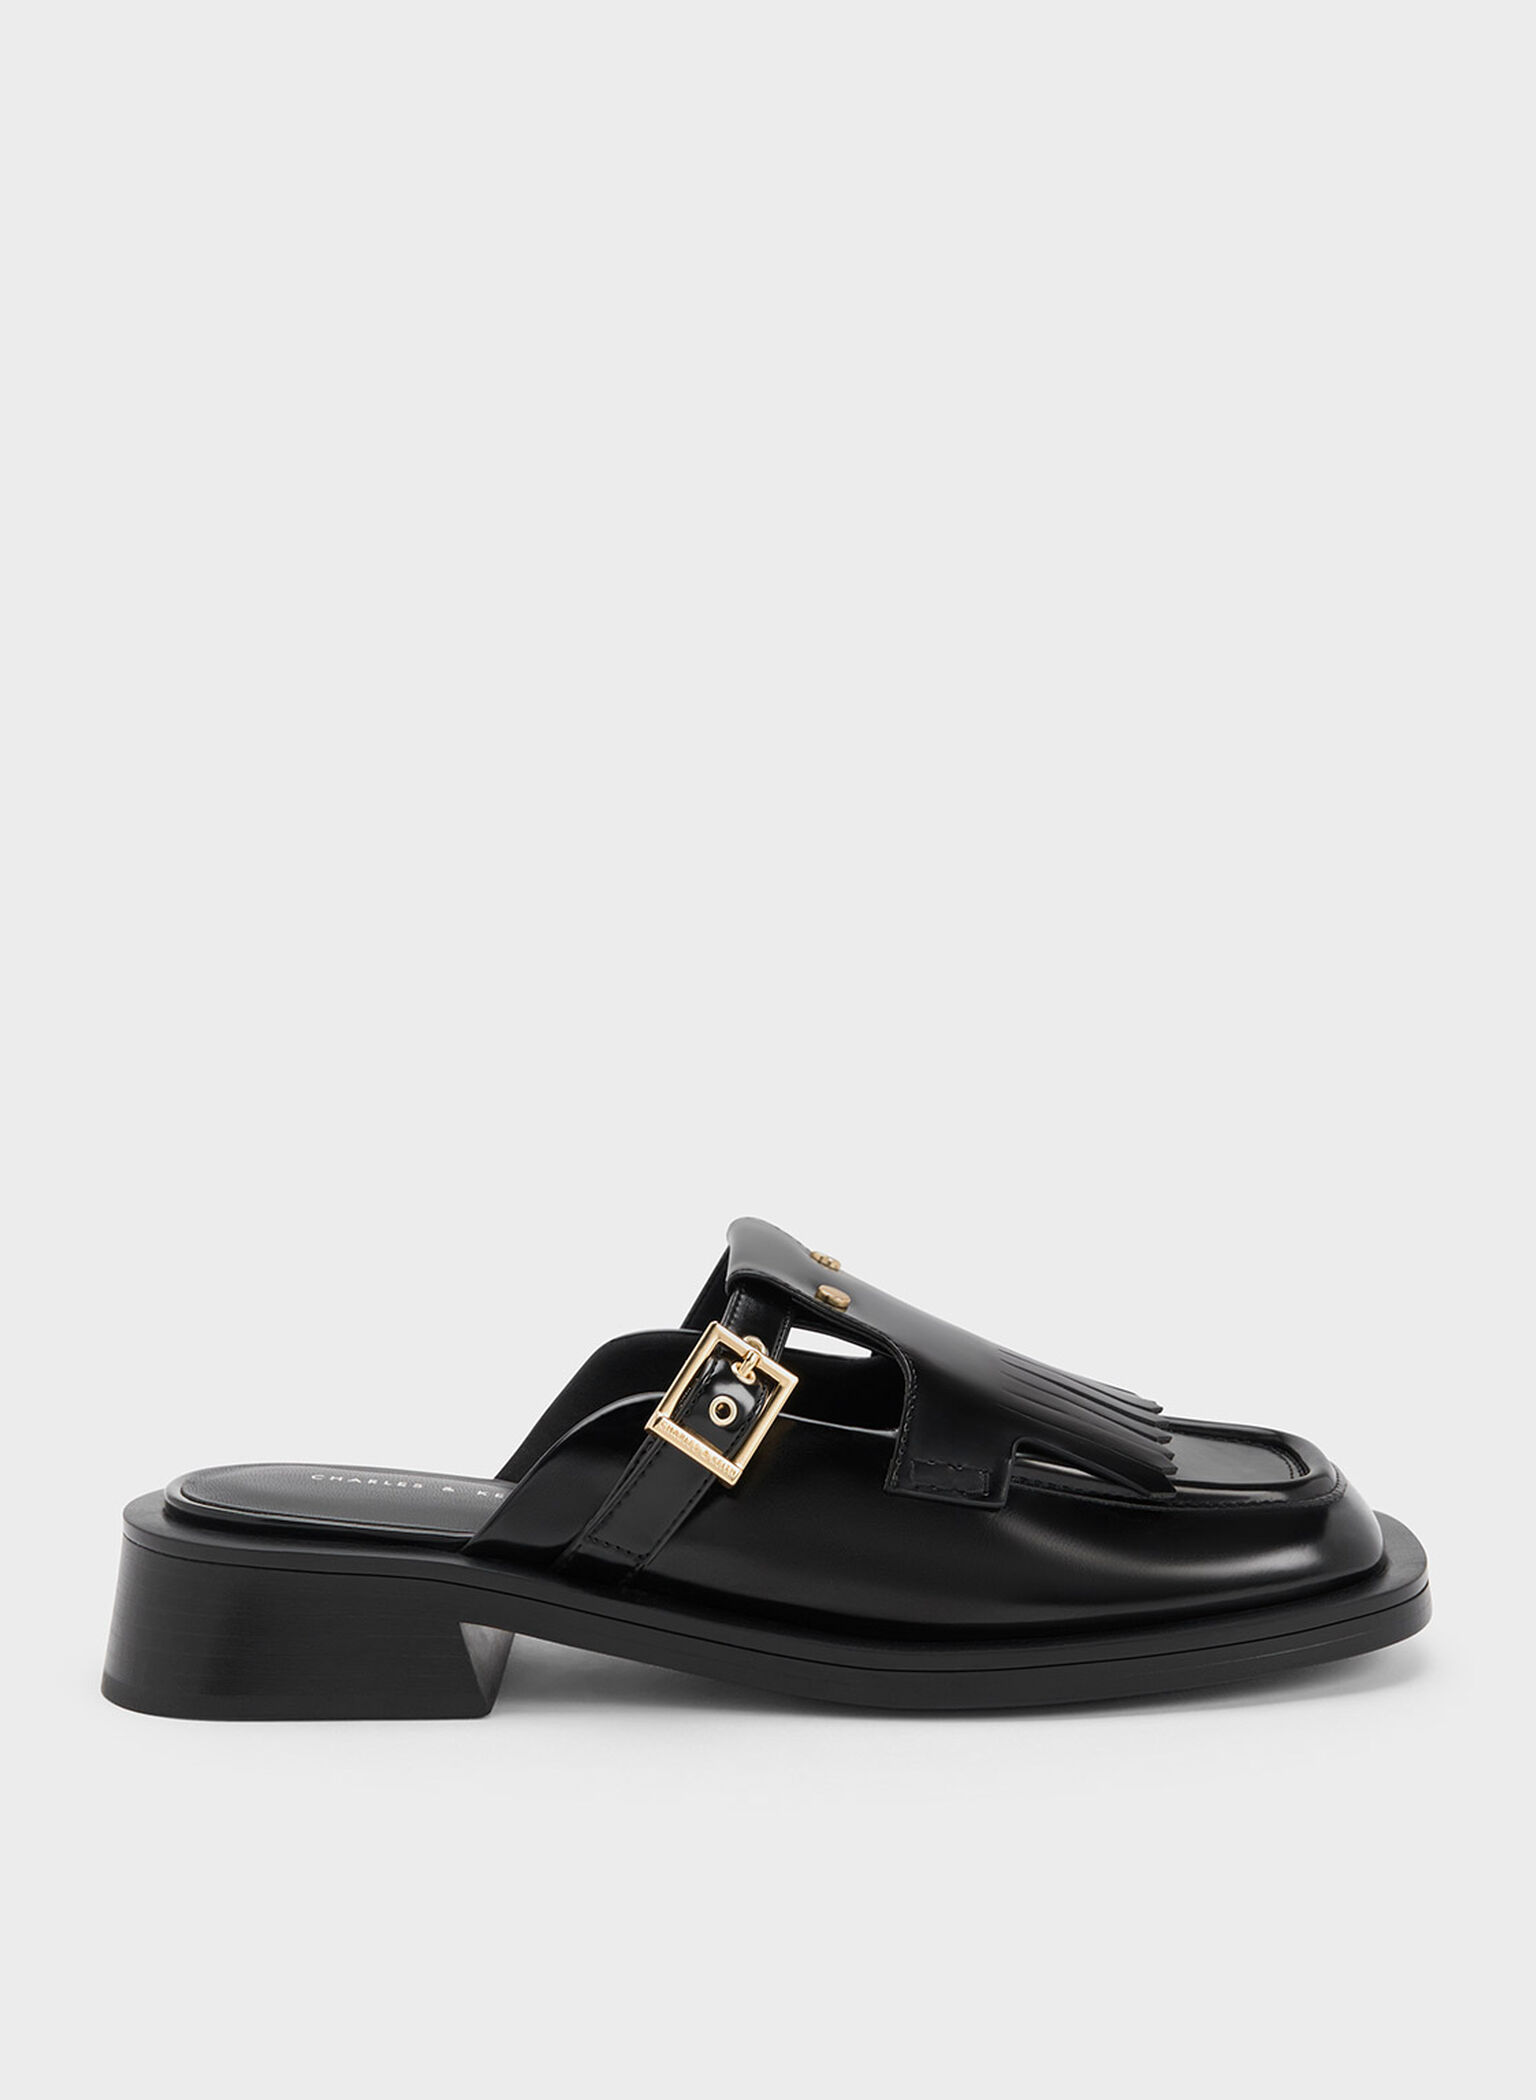 Black Boxed Studded Cut-Out Fringe Mules - CHARLES & KEITH US